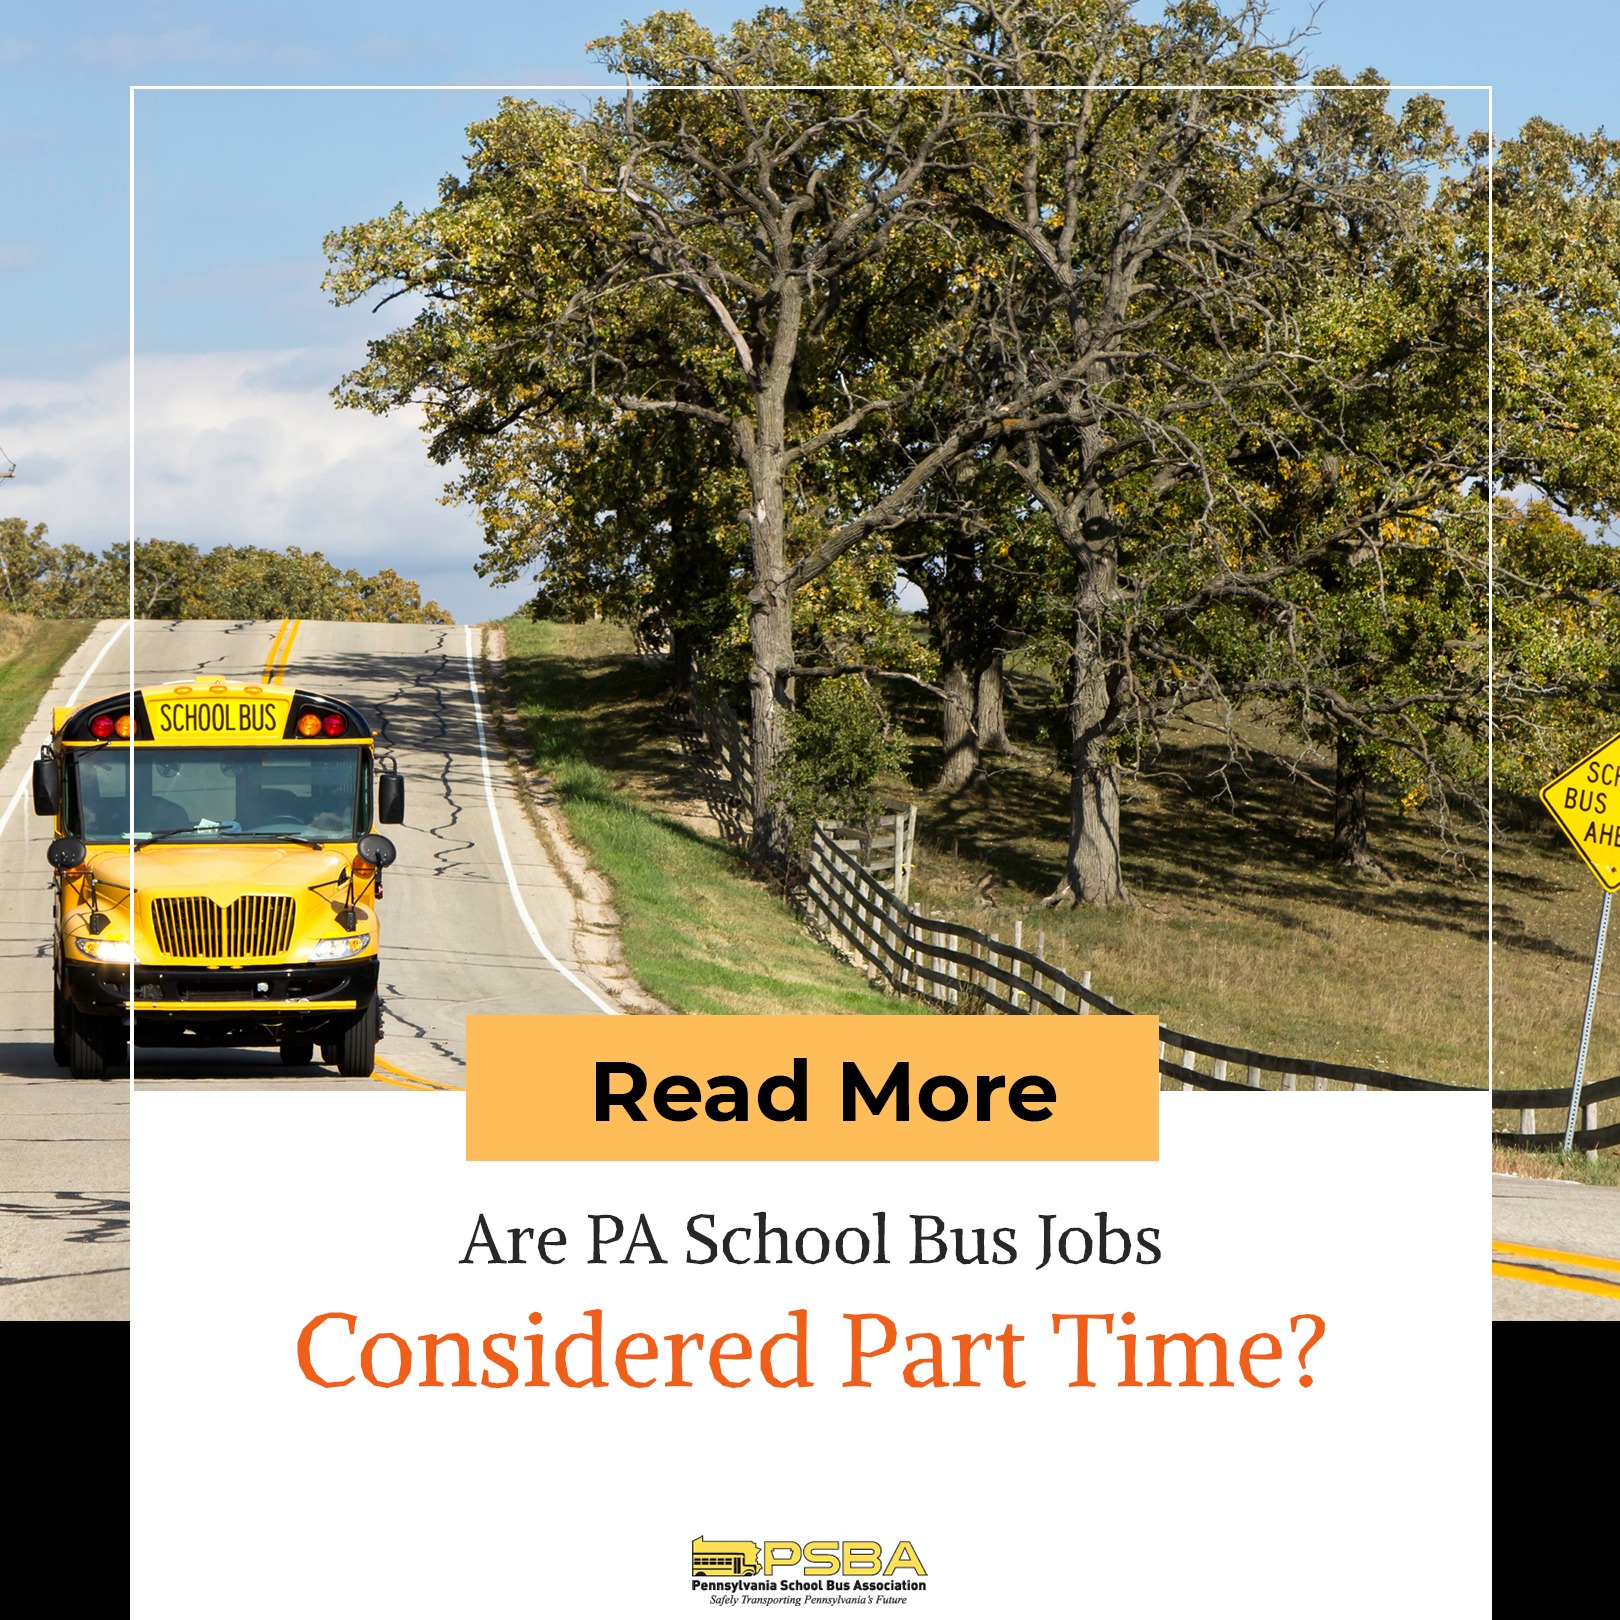 Are PA School Bus Jobs Considered Part-Time?